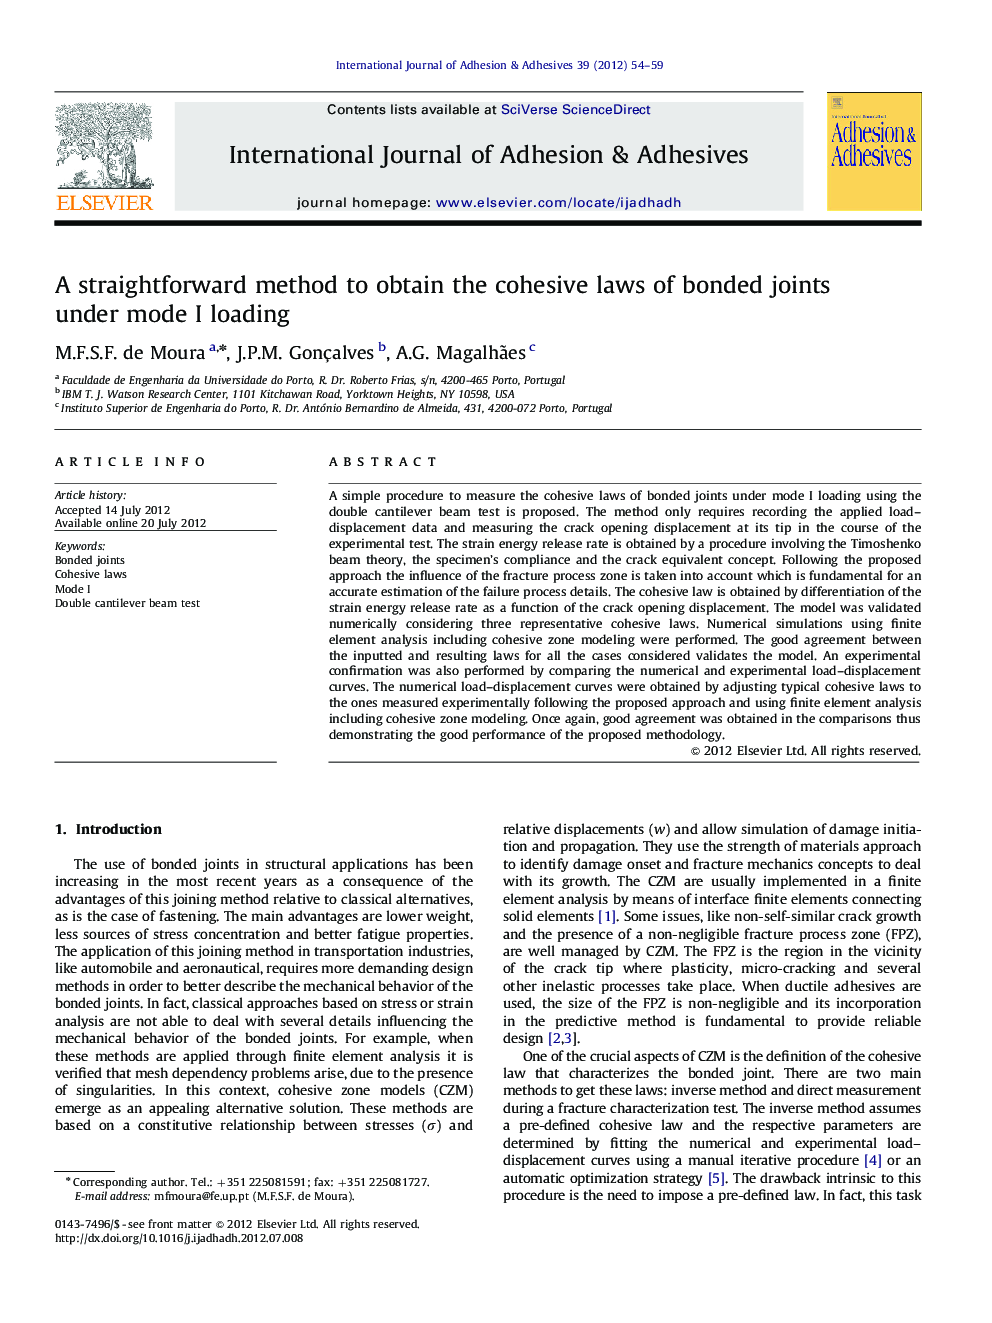 A straightforward method to obtain the cohesive laws of bonded joints under mode I loading